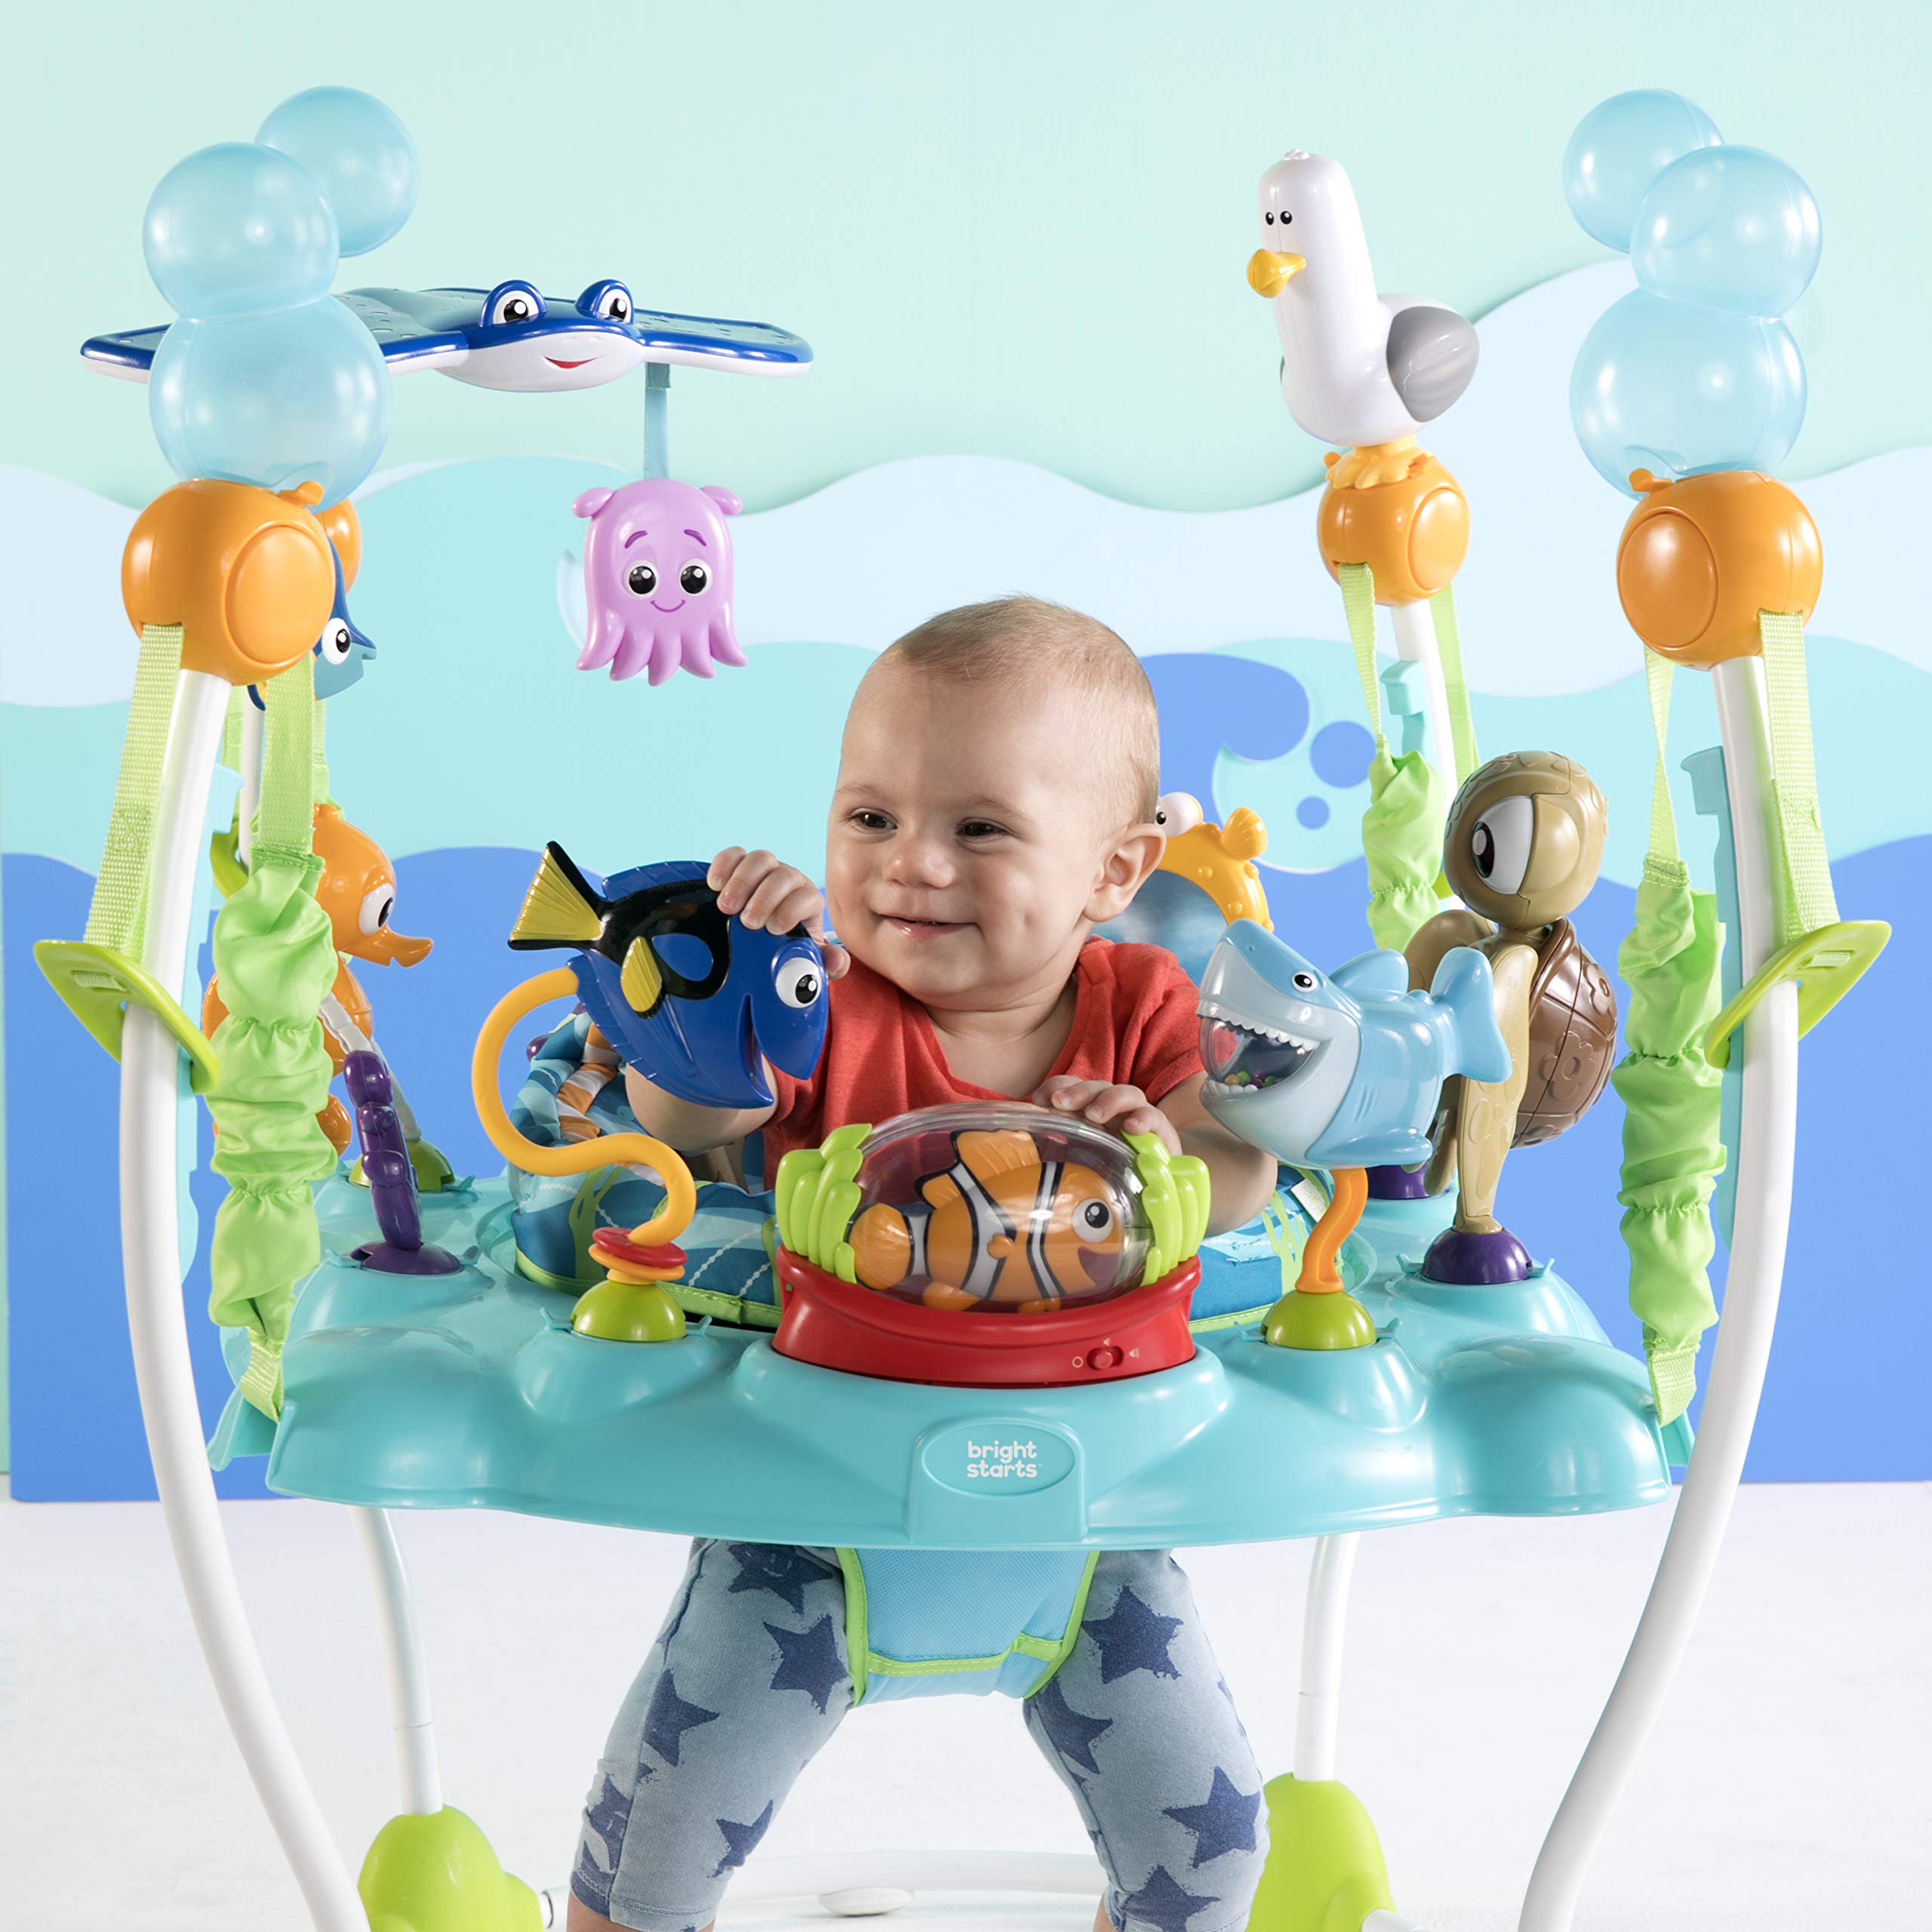 Disney Baby Finding Nemo Sea of Activities Baby Activity Center Jumper with Interactive Toys, Lights, Songs & Sounds, 6-12 Months (Blue)